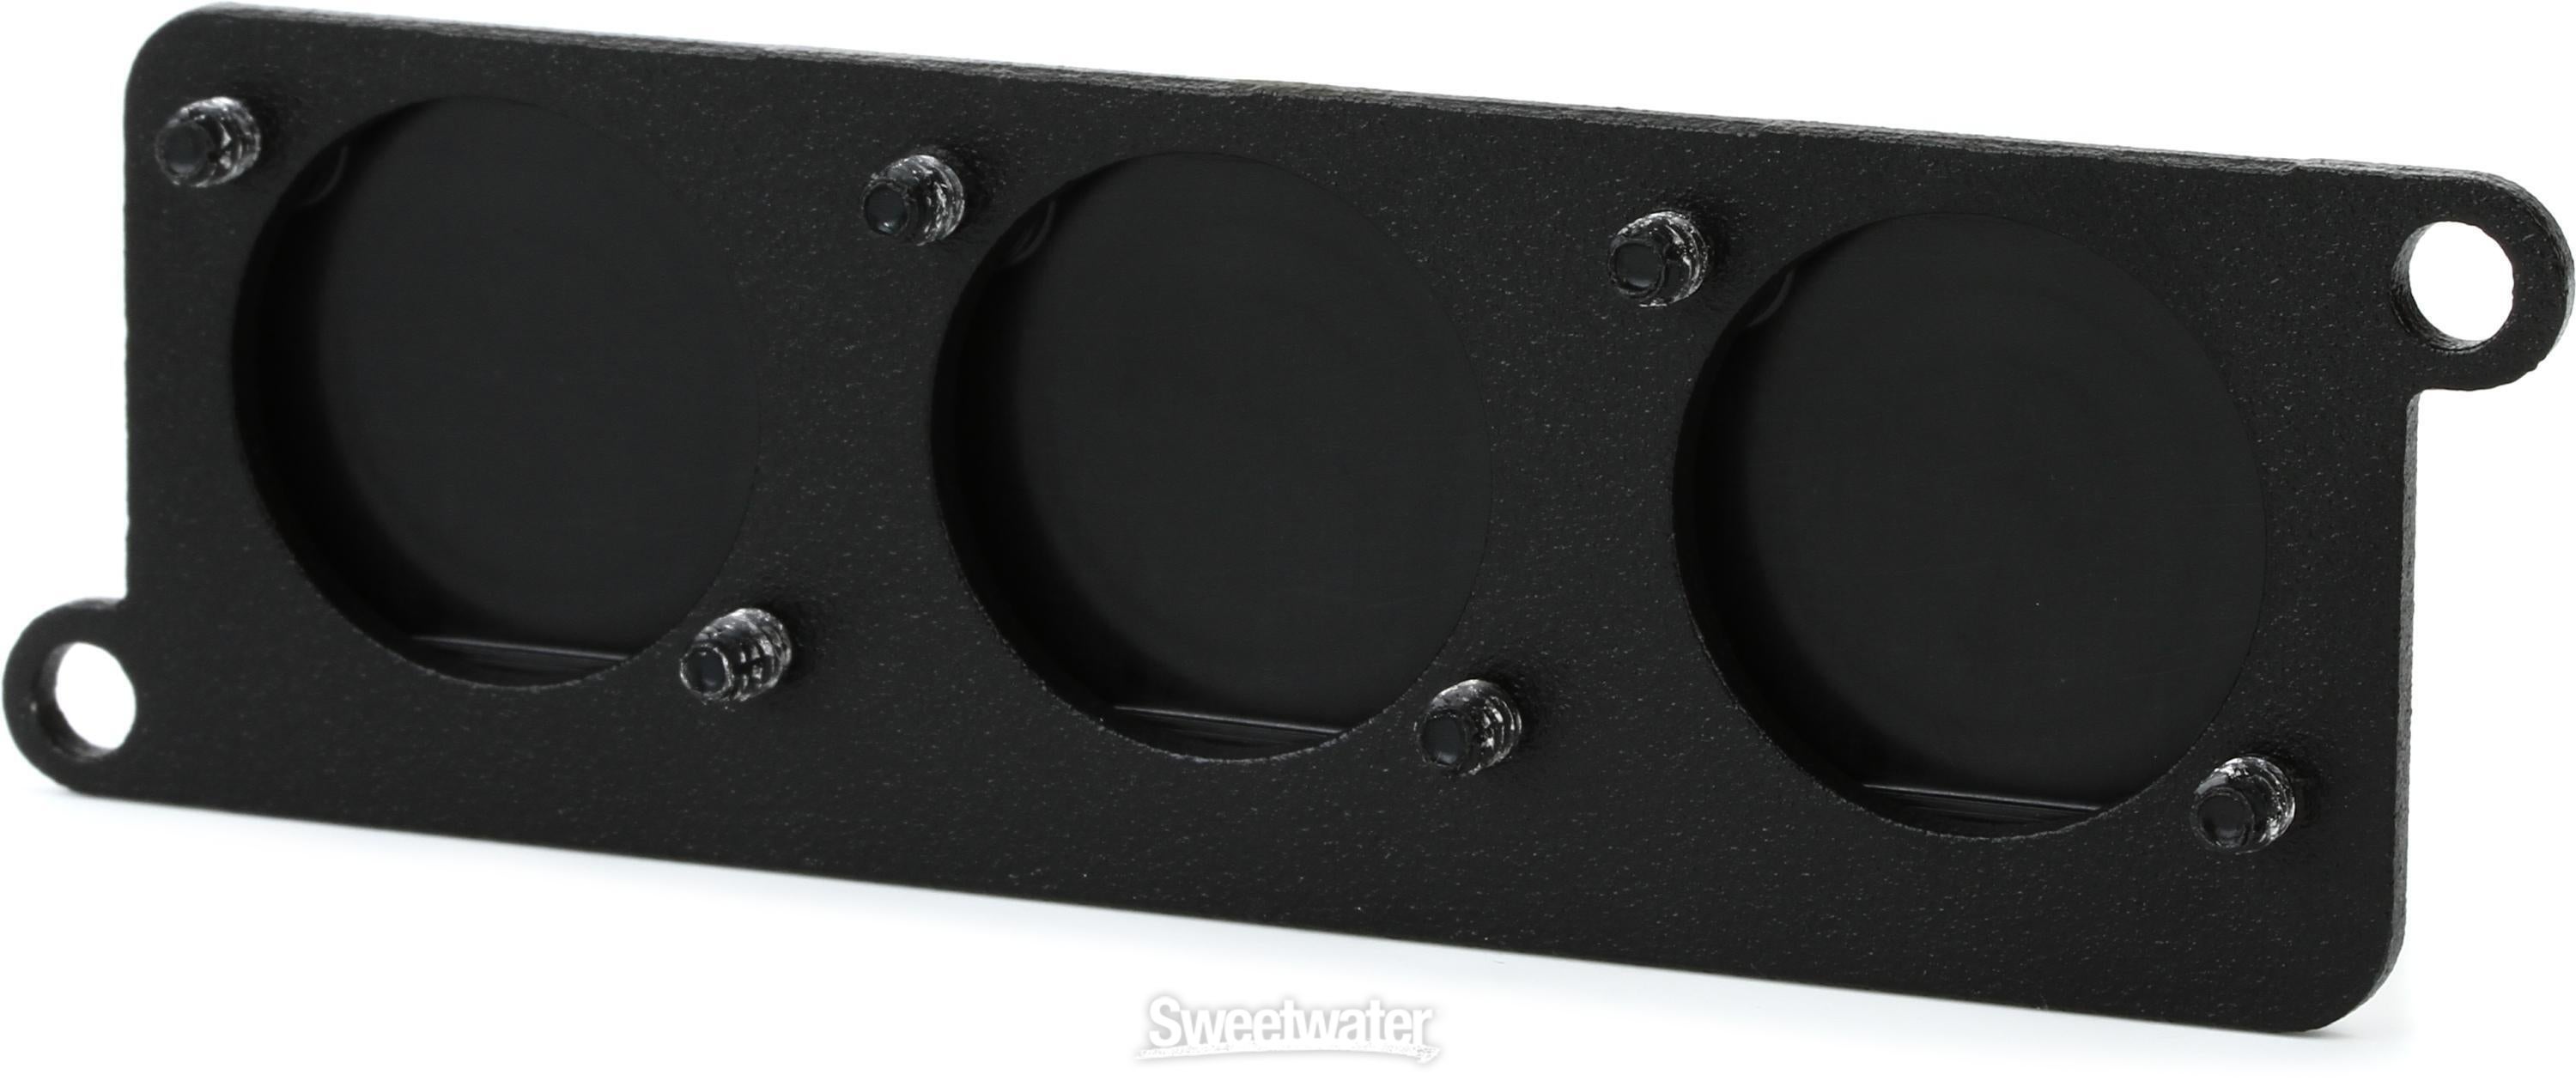 Temple Audio Mini Module Punched Plate | Sweetwater